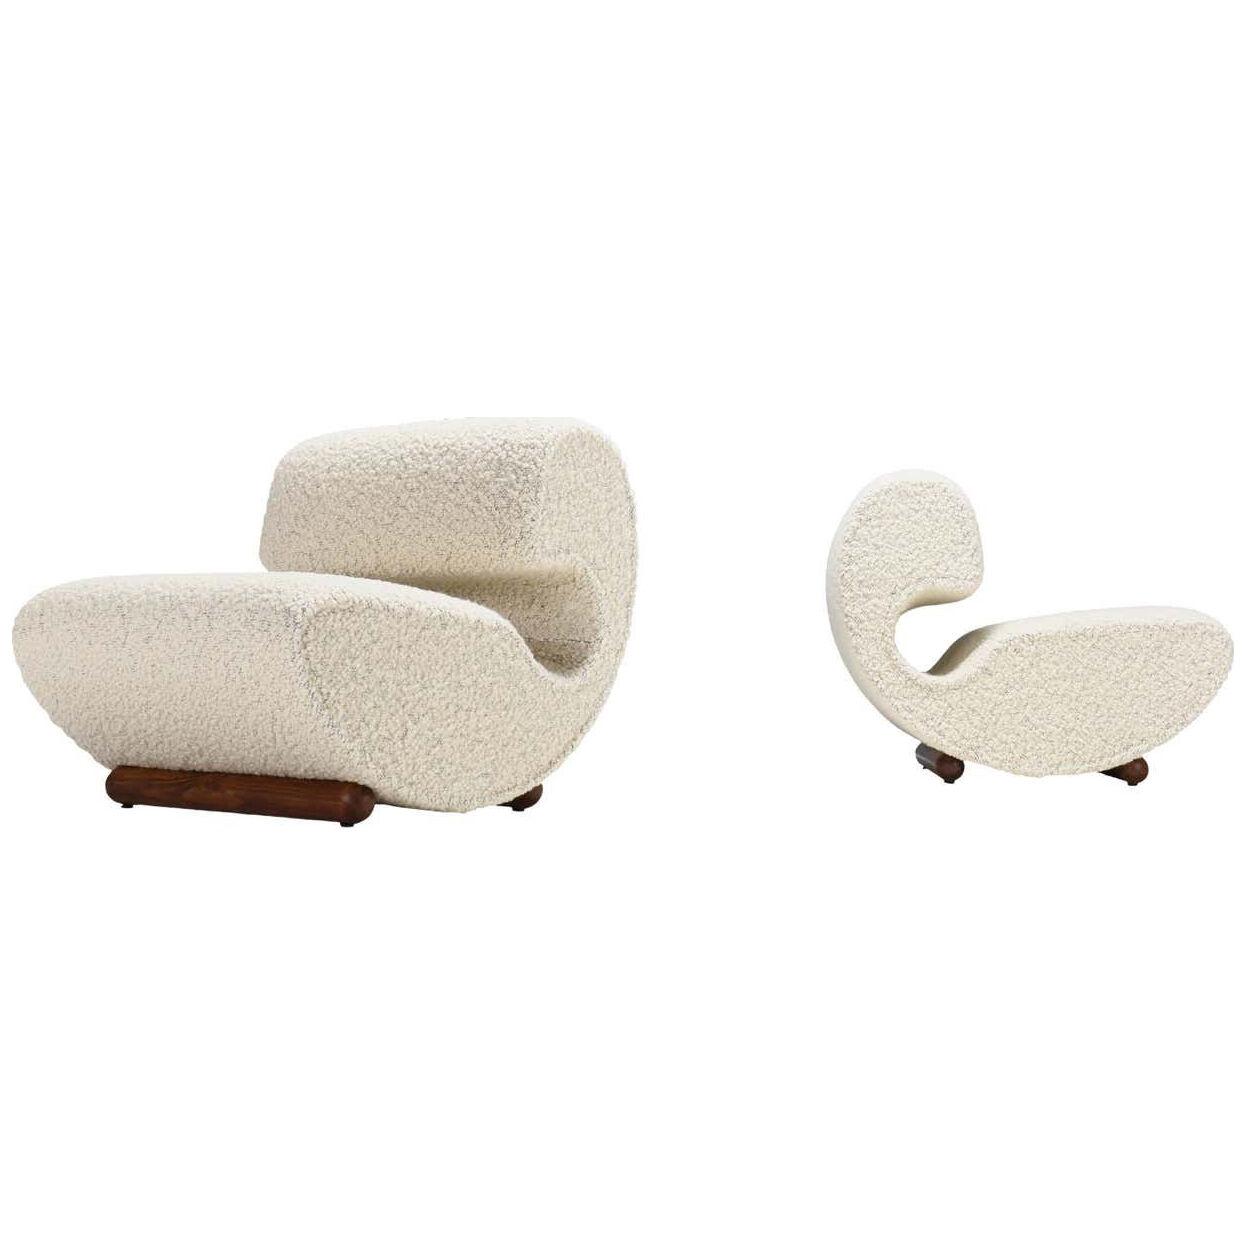 Set of Sculptural Curved Chairs in a Thick Bouclé, Italy, 1960s